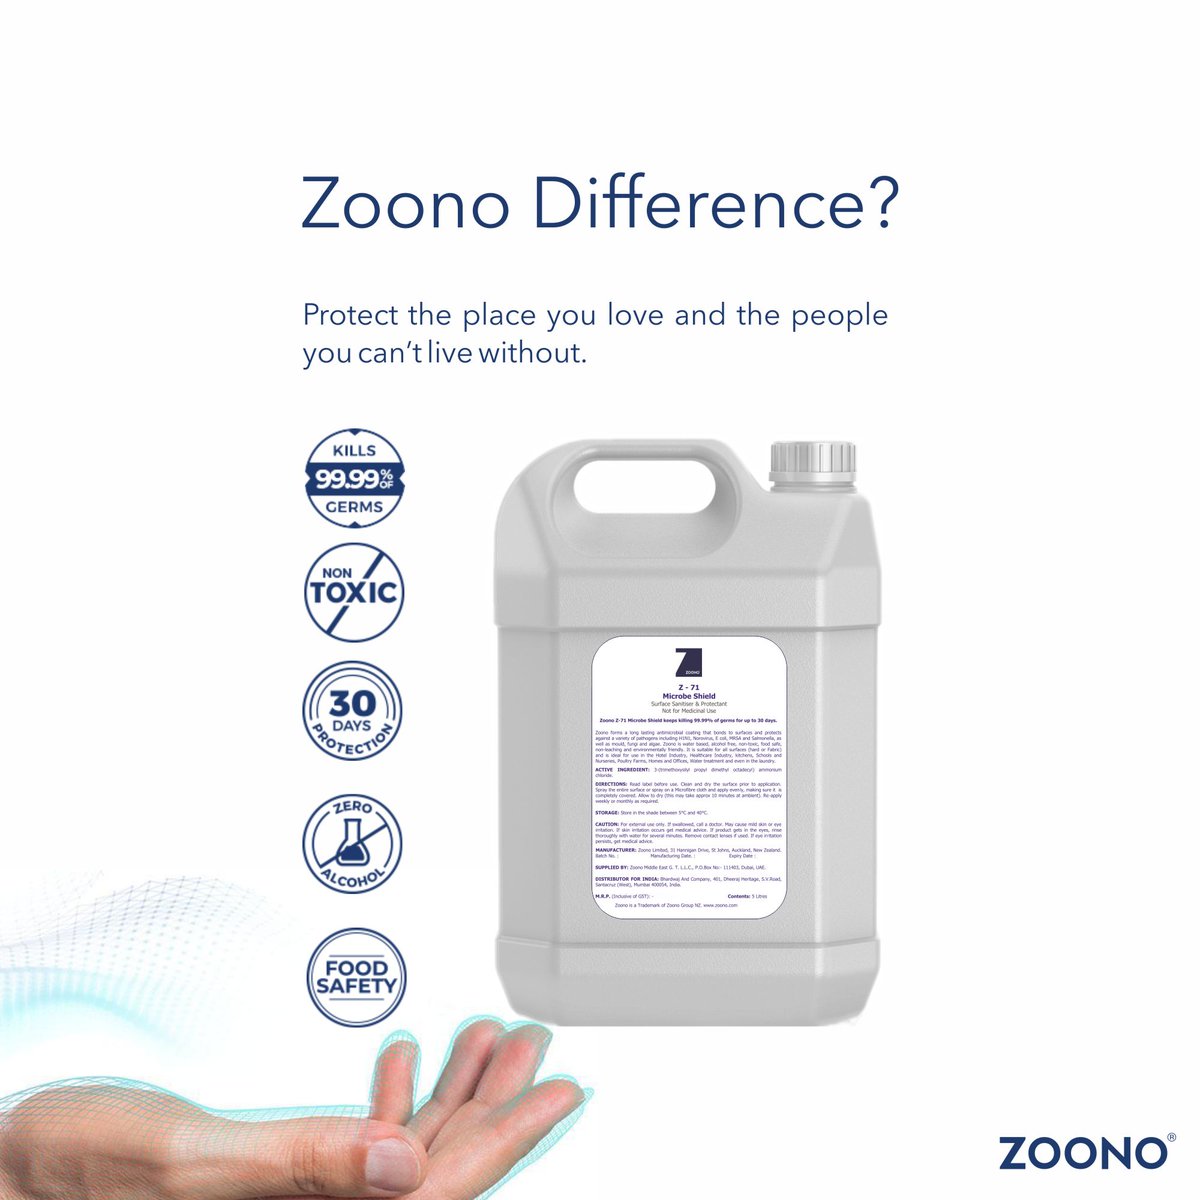 Zoono Z71: The Safe and Effective Way to Shield Against Viruses